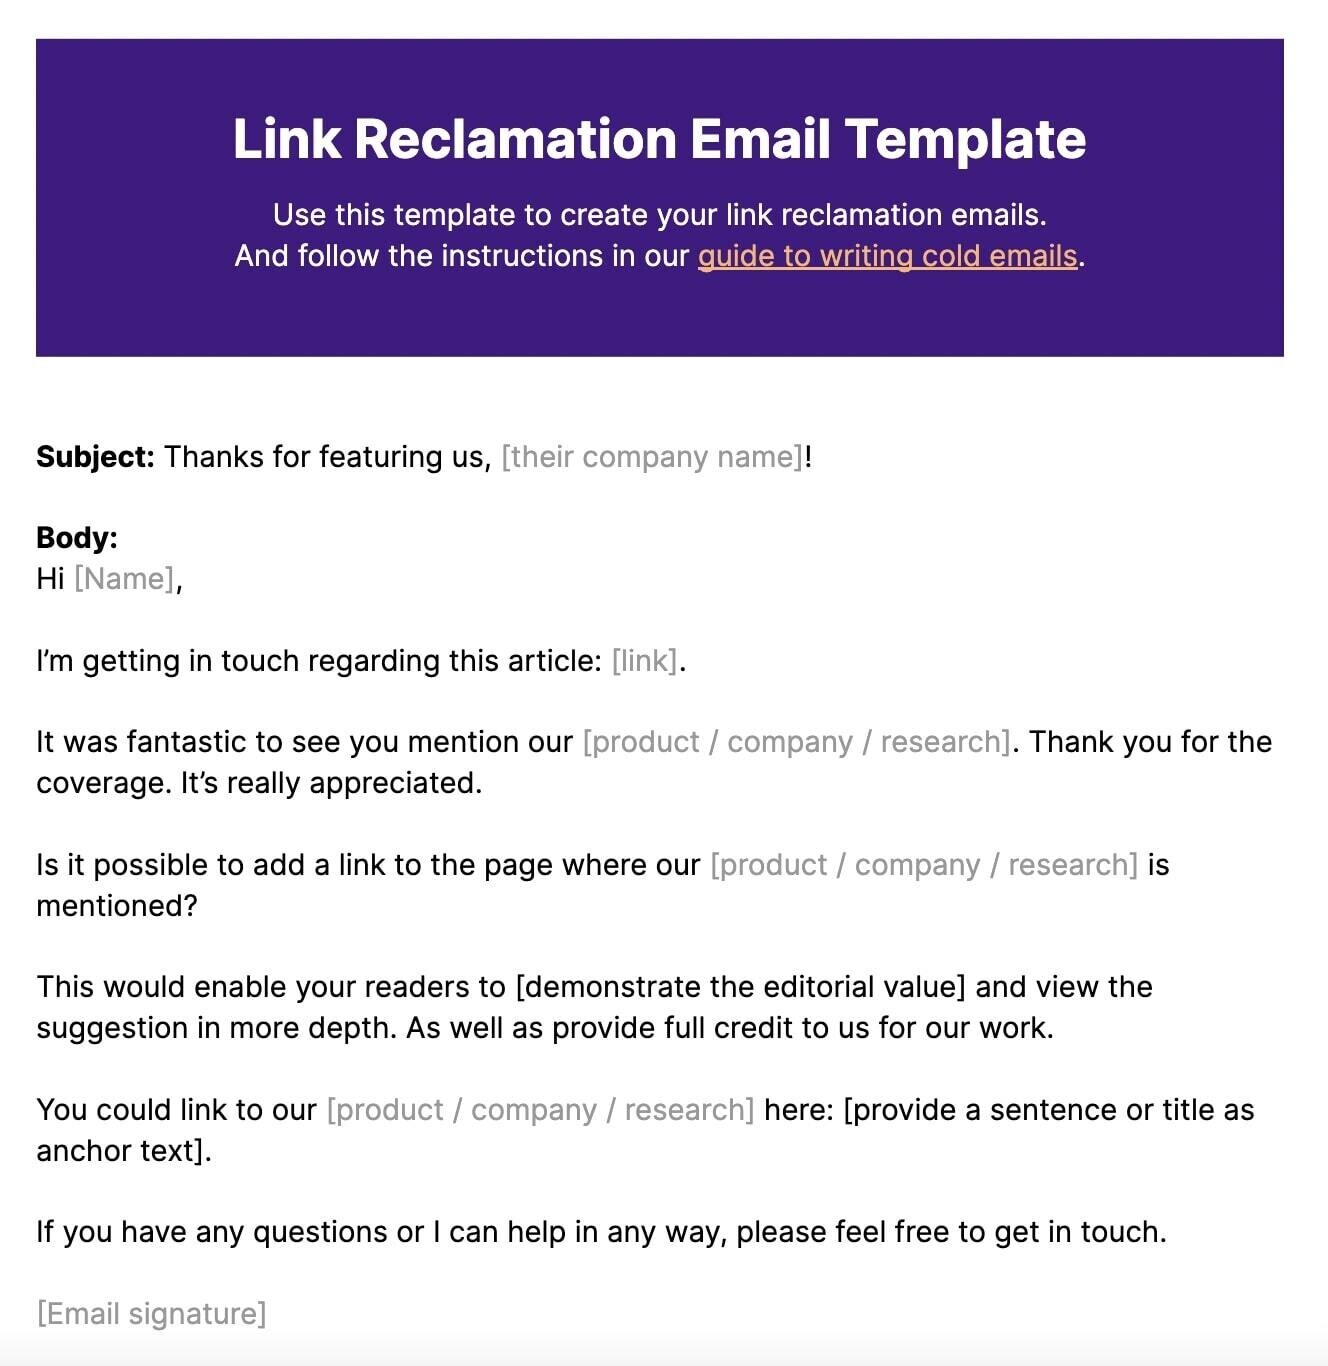 Link Reclamation Email Template